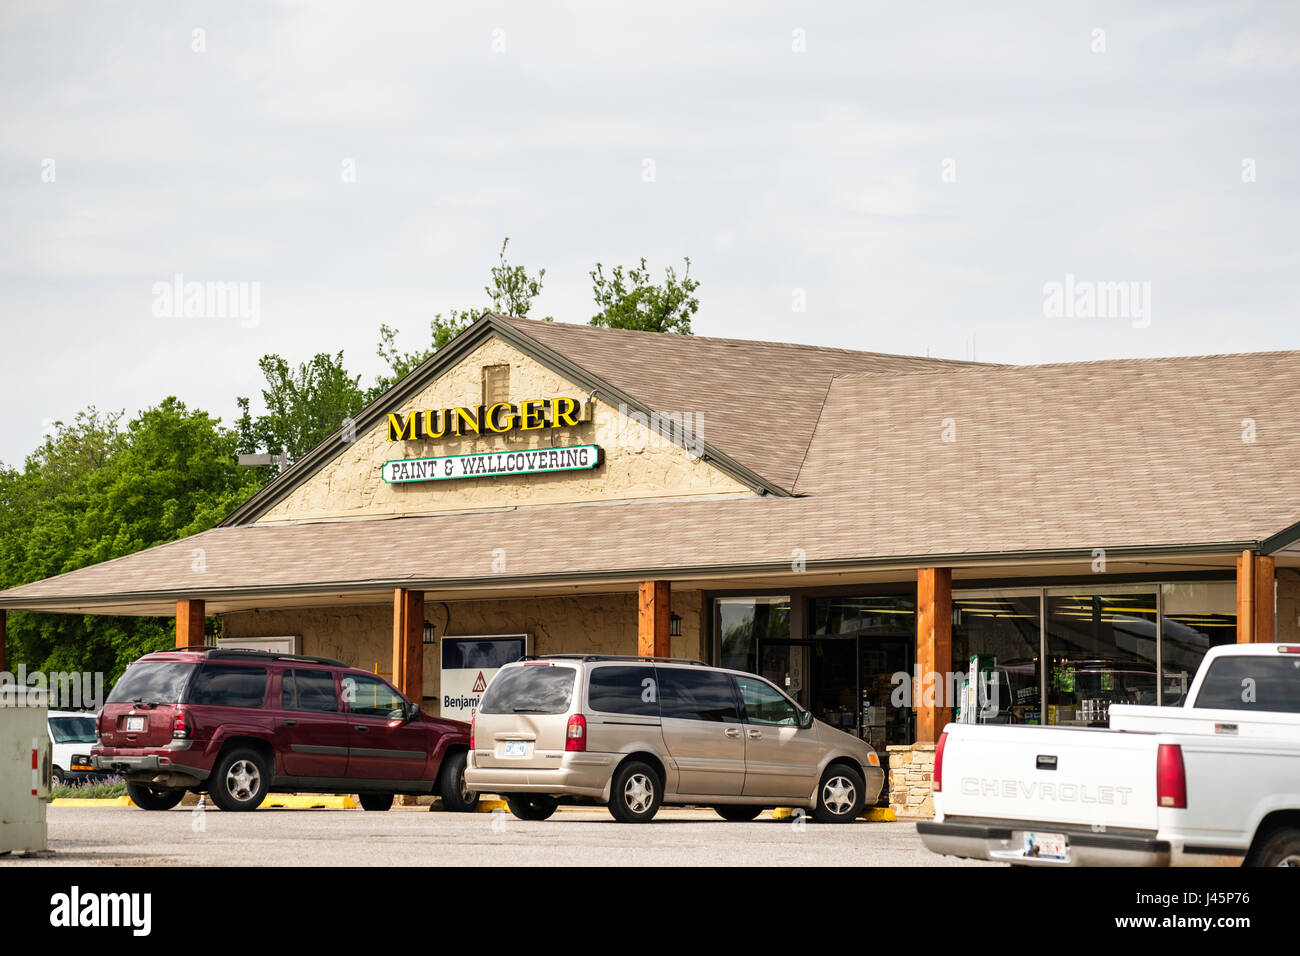 Exterior storefront and entrance of Munger Paint & Wallcovering shop located on North McArthur, Oklahoma City, Oklahoma, USA. Stock Photo